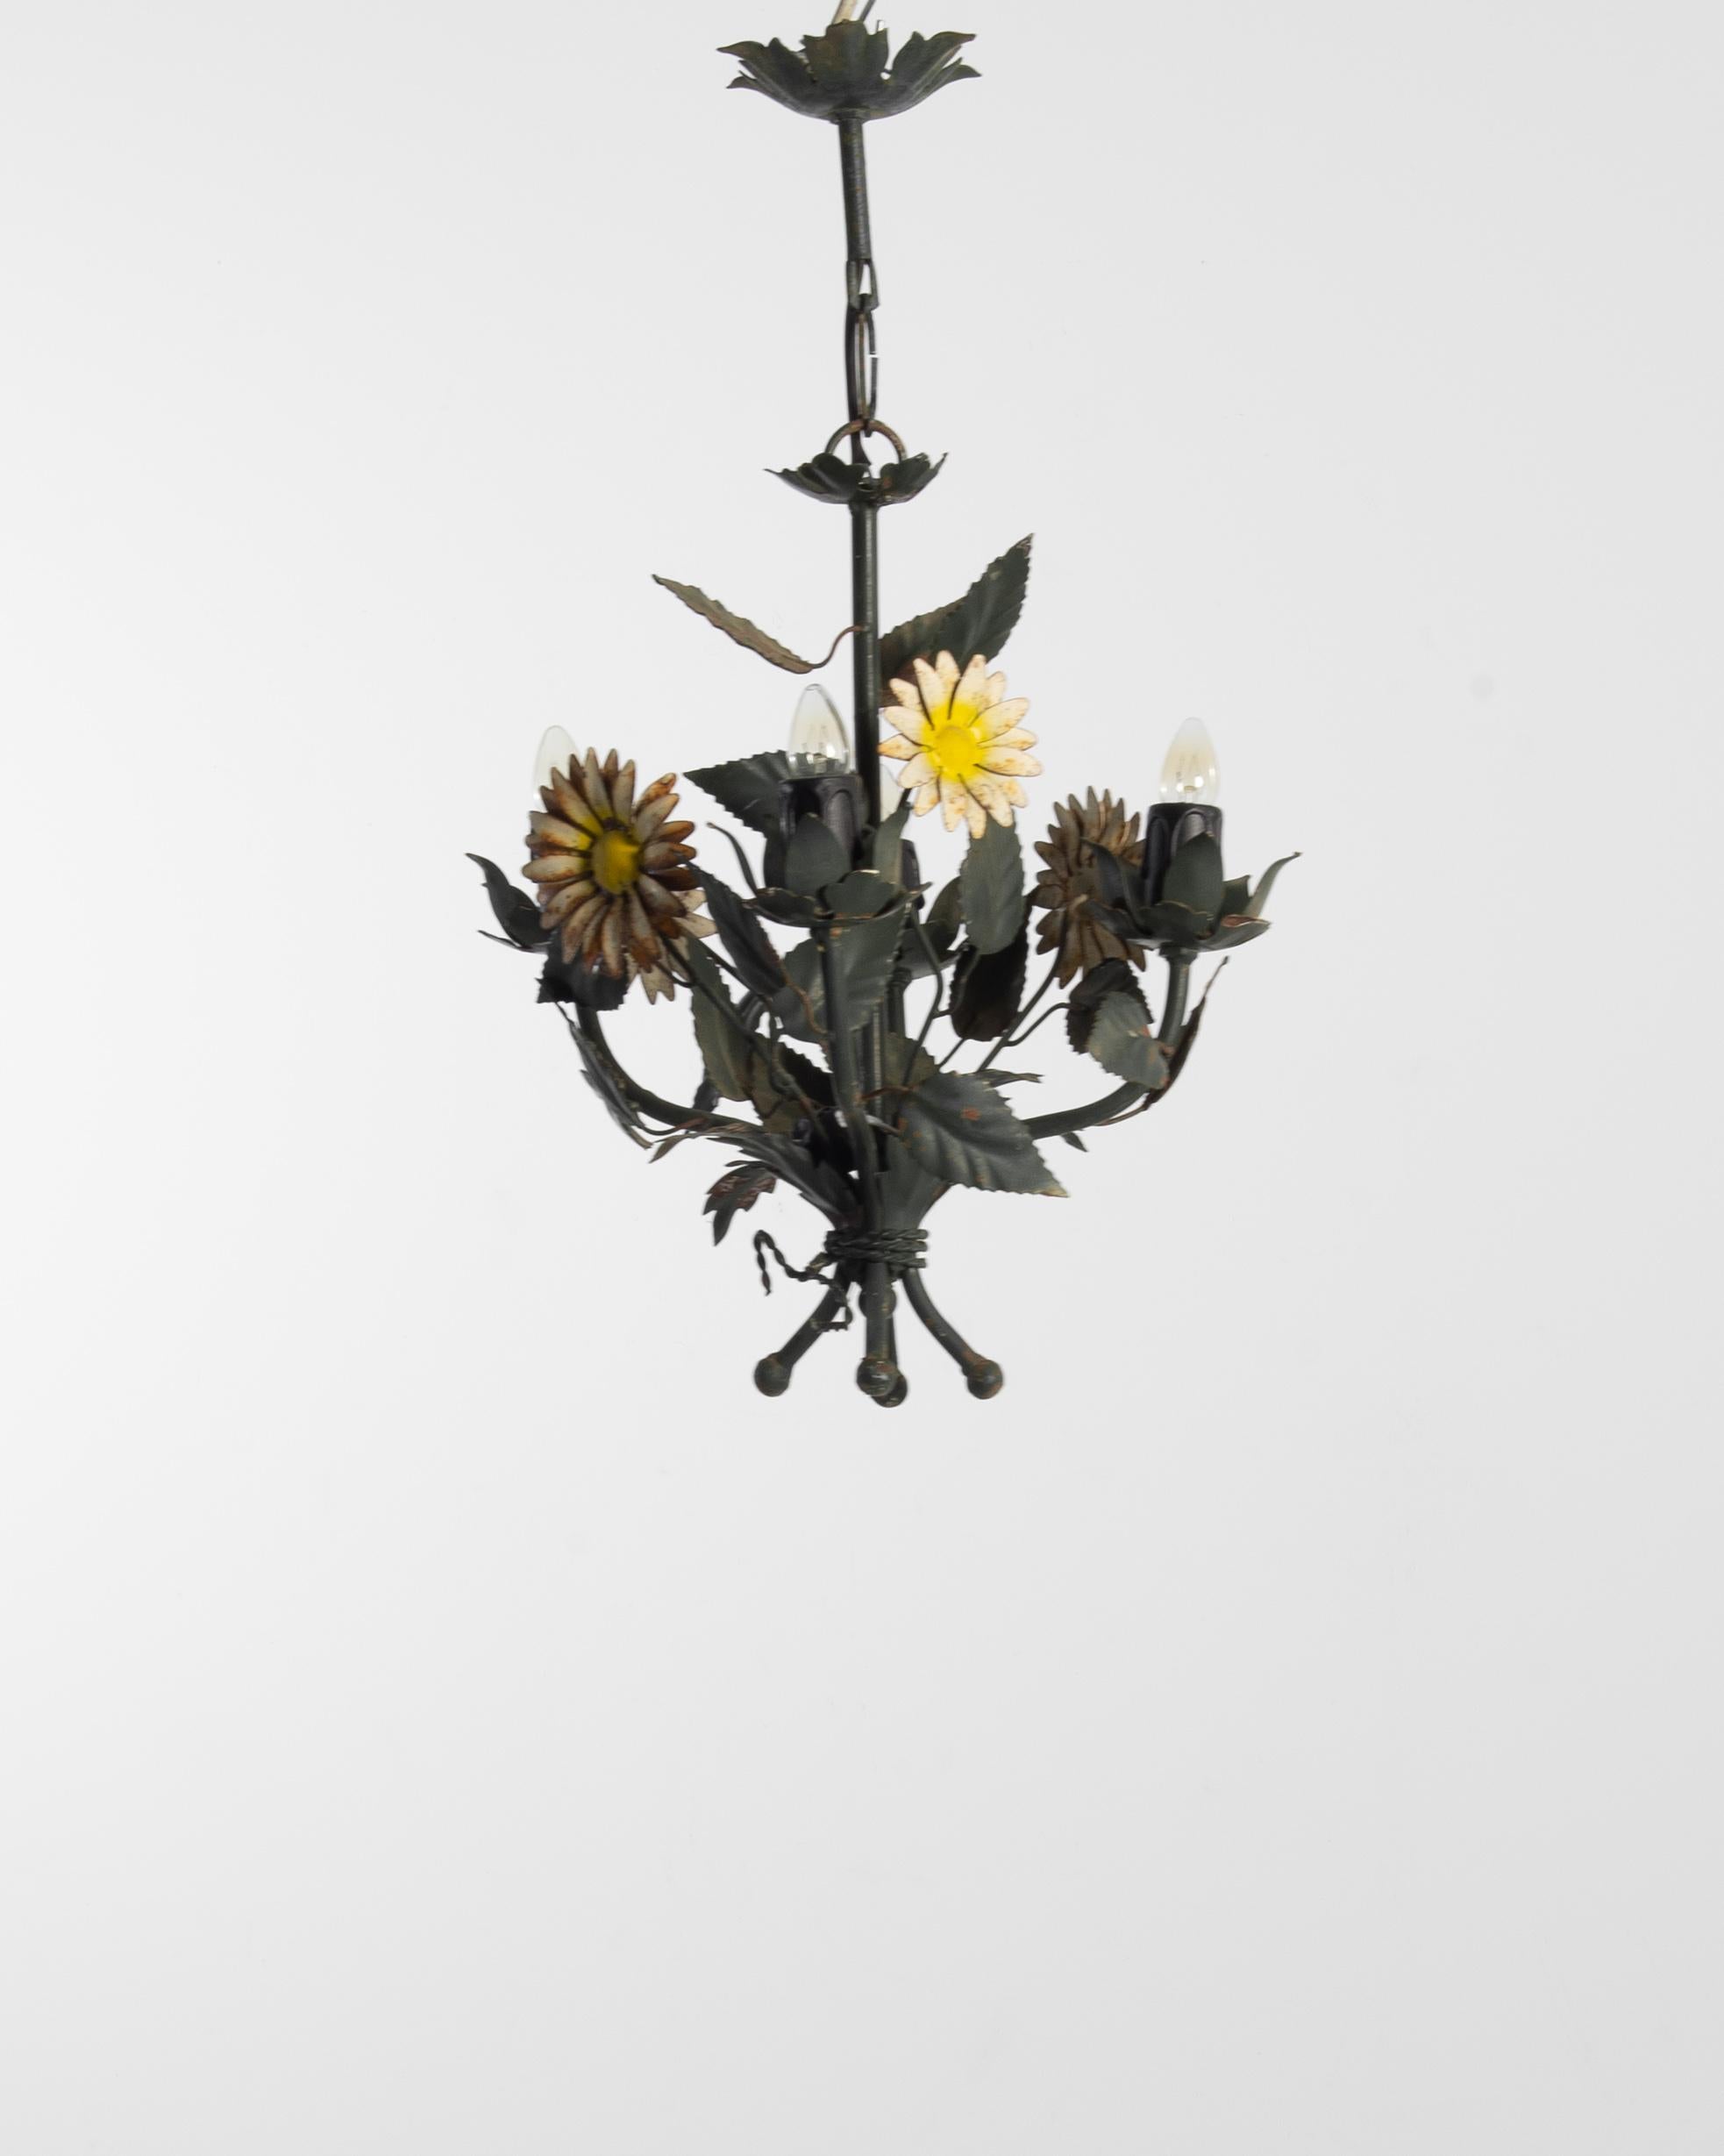 Made in France in the 20th Century, this beautiful metal chandelier imitates the form of a bouquet of wildflowers. Ox-eye daisies blossom among green leaves; a woven cord wraps round the stems at the base. The detailed forms and asymmetric